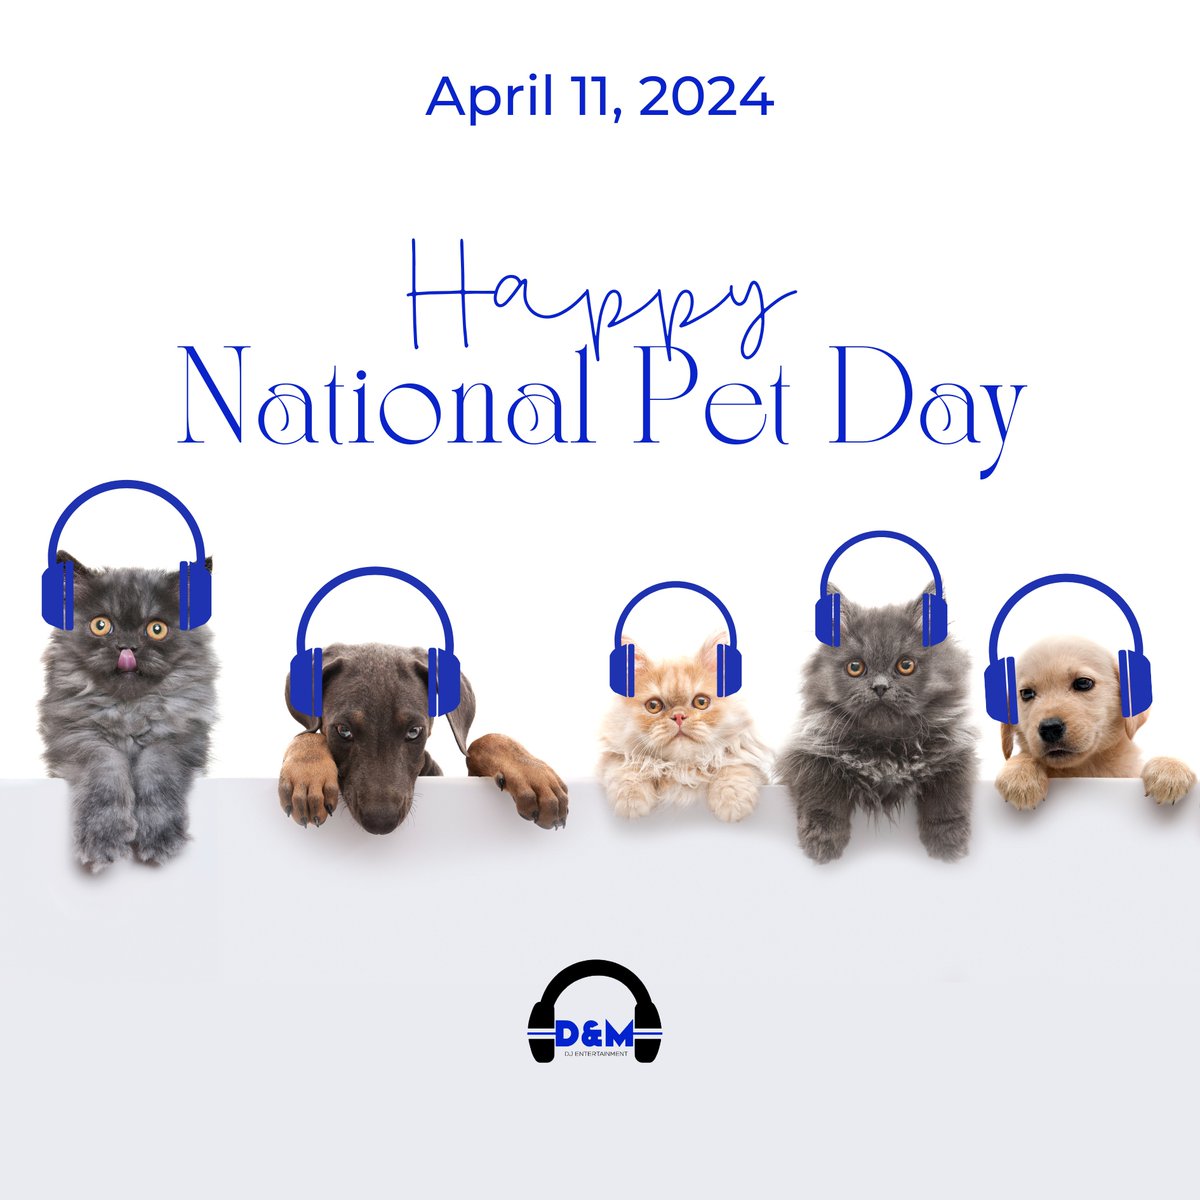 Happy National Pet Day! We hope you get time to give your favorite furball family members some extra treats today. You give them some extra love by sharing one of your favorite photos with us below!

#nationalpetday #lovepets #dog #cat #lovemypet #furball #dandmdjentertainment